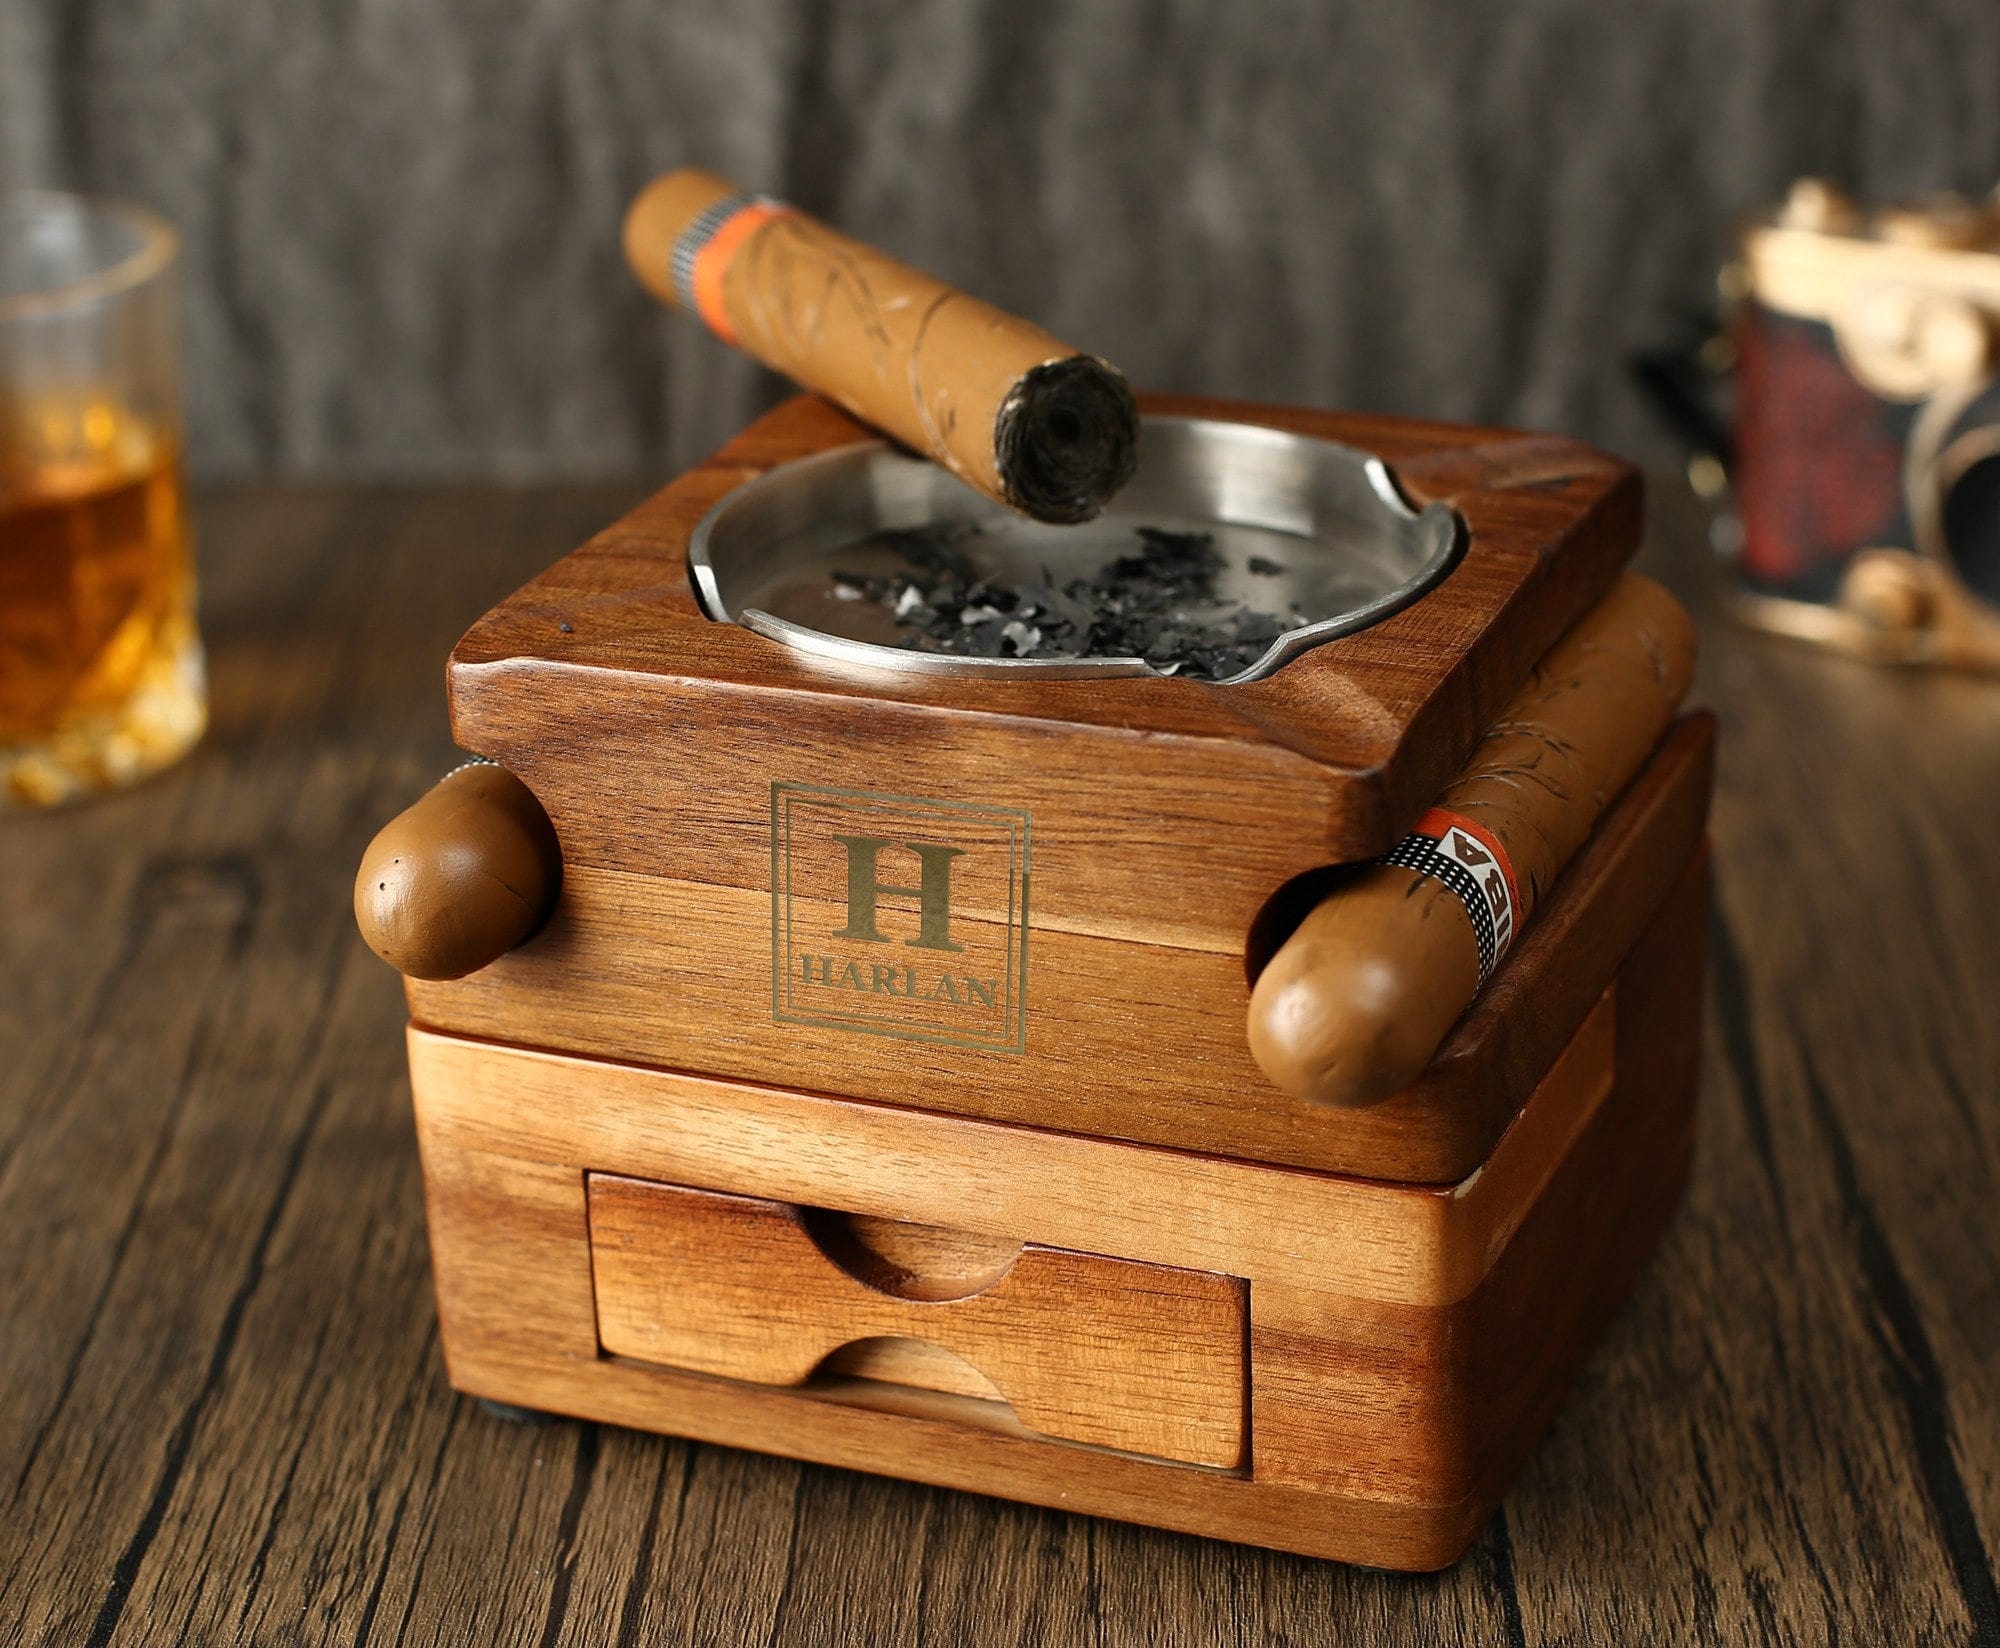 Cigar Ashtray Whiskey Glass Tray - Wood Ash Tray with Slot Hold Cigar,  Cigar Whiskey Accessories Set Gift for Men Dad, Cigar Holder with Drawer  for Home, Office, Bar 